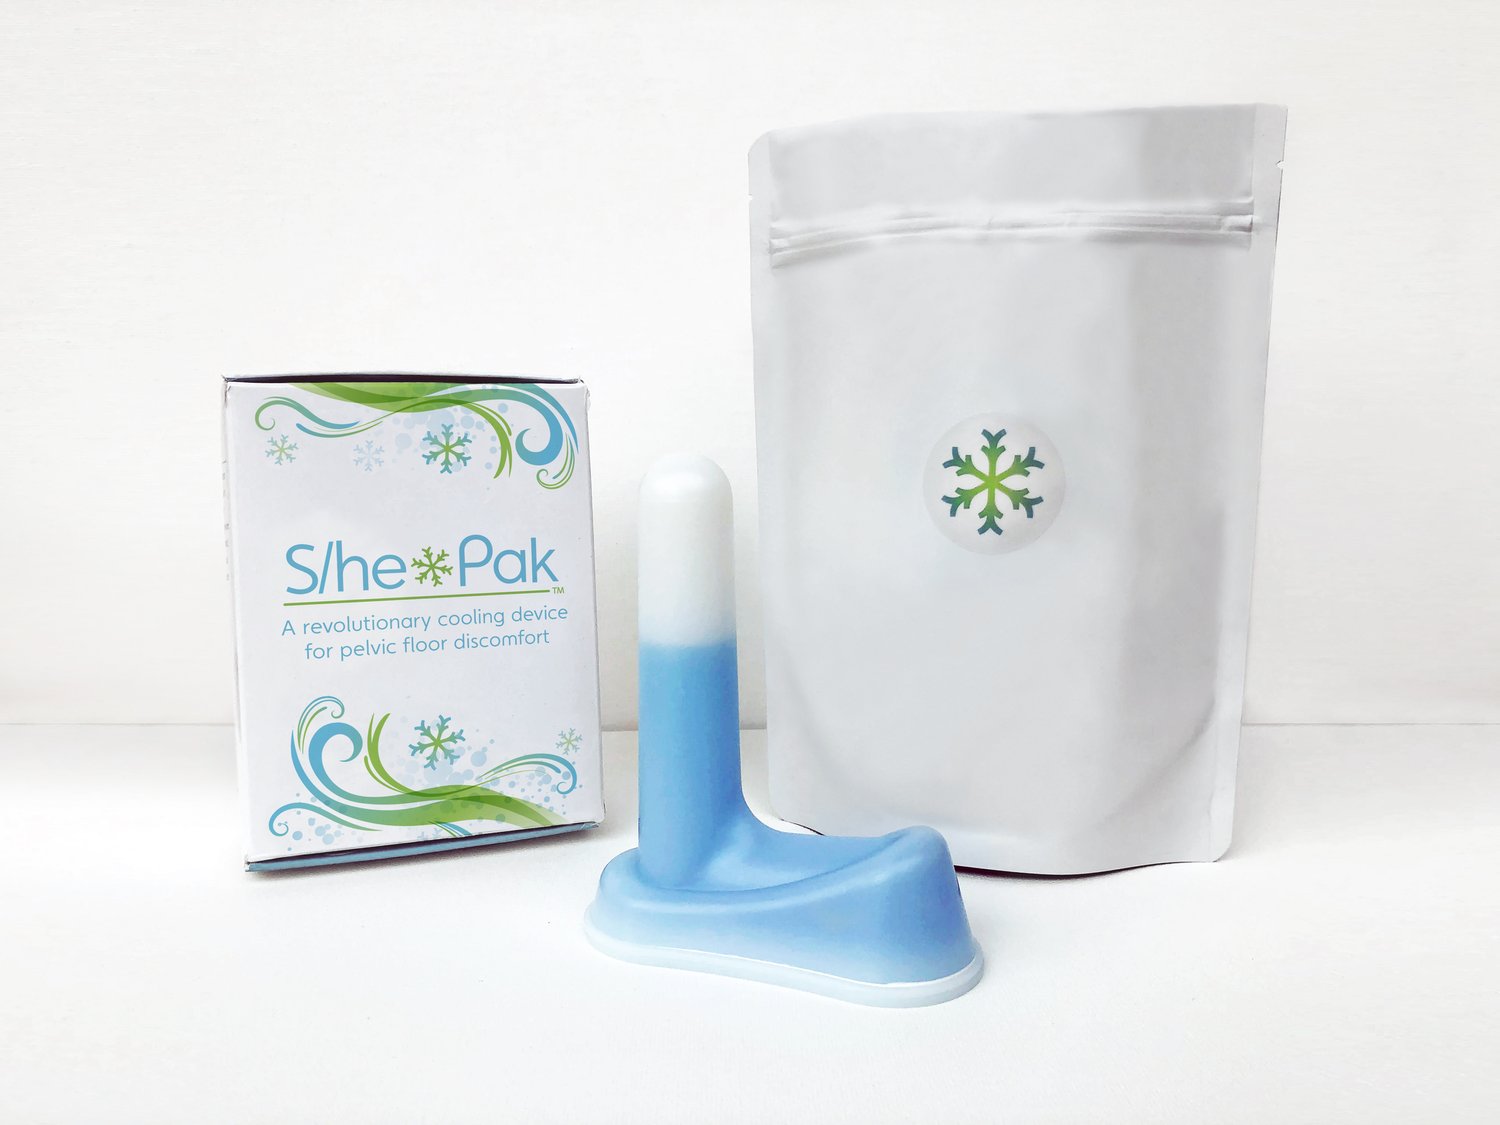 S/he*Pak Cooling Device: Innovative Ice Pack Solution for Pelvic Floor Pain